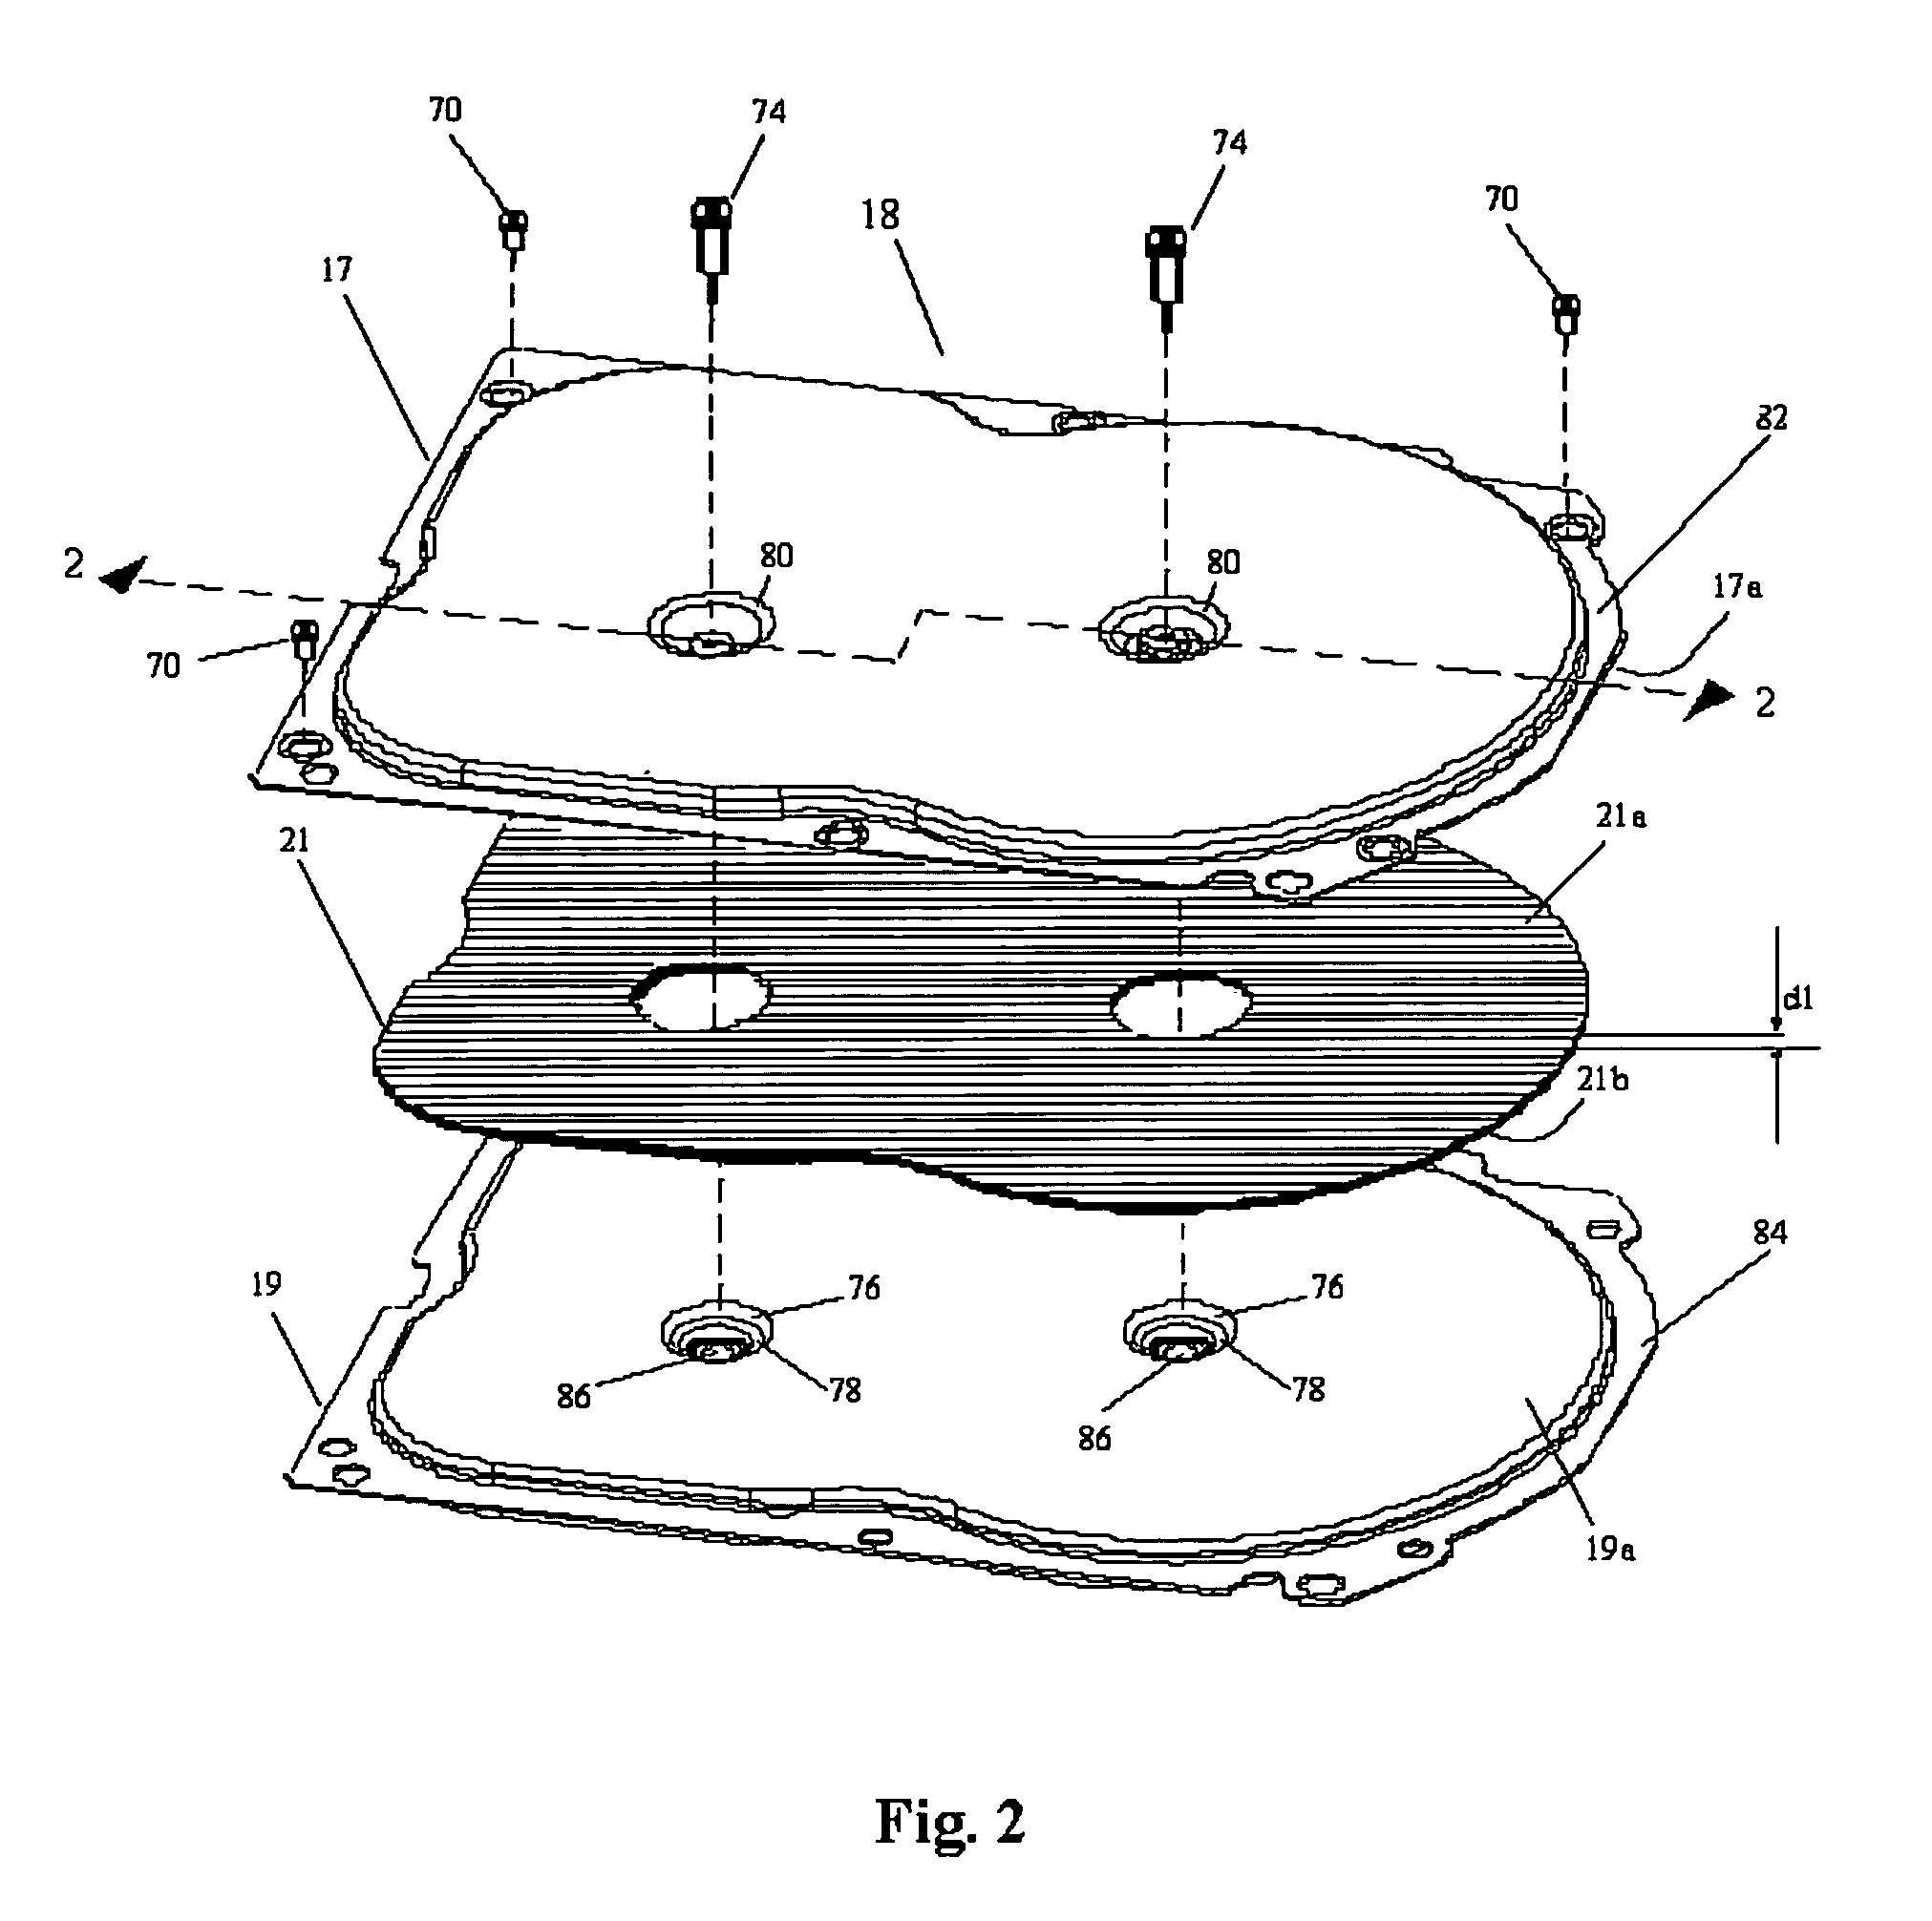 Disk drive having cover assembly which compresses a foam member between substantially planar rigid members